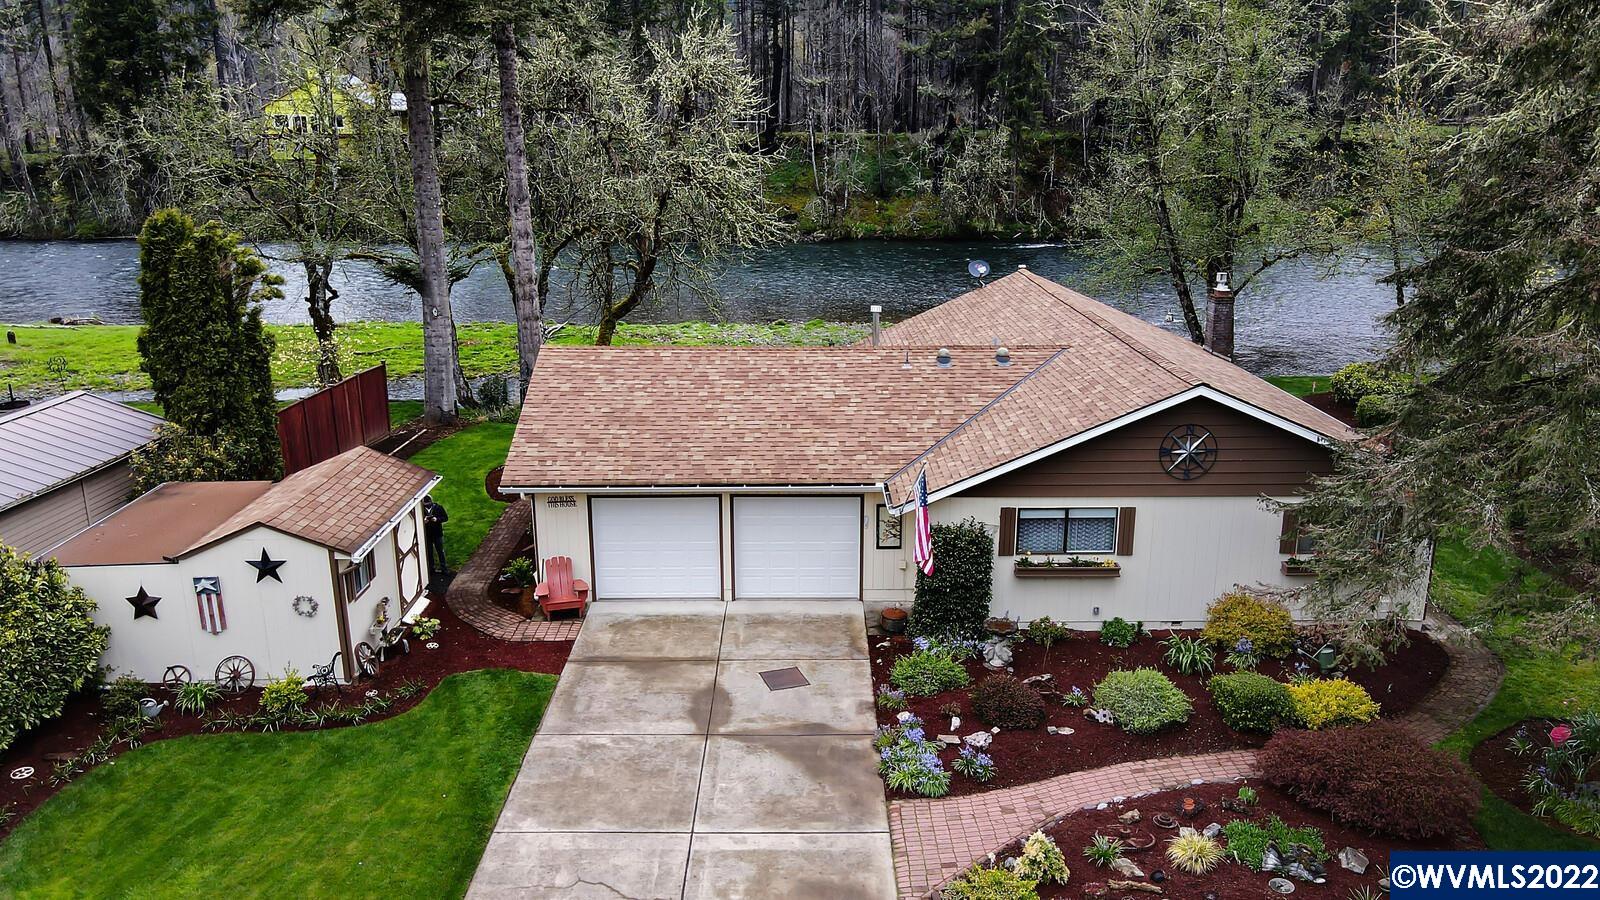 Accepted Offer with Contingencies. Some of the best Santiam River frontage on a slow & peaceful section of the river.  Open vaulted floor plan with floor to ceiling windows to enjoy the unobstructed views.  Kitchen has been nicely updated with new cabinets, island & granite counters.  Large deck, patio & firepit area.   The house has been exceptionally well maintained.  100' deep paved driveway allows room for parking all your guests.   Unique frontage has shallow side channel & seasonal island that allows much safer swimming.